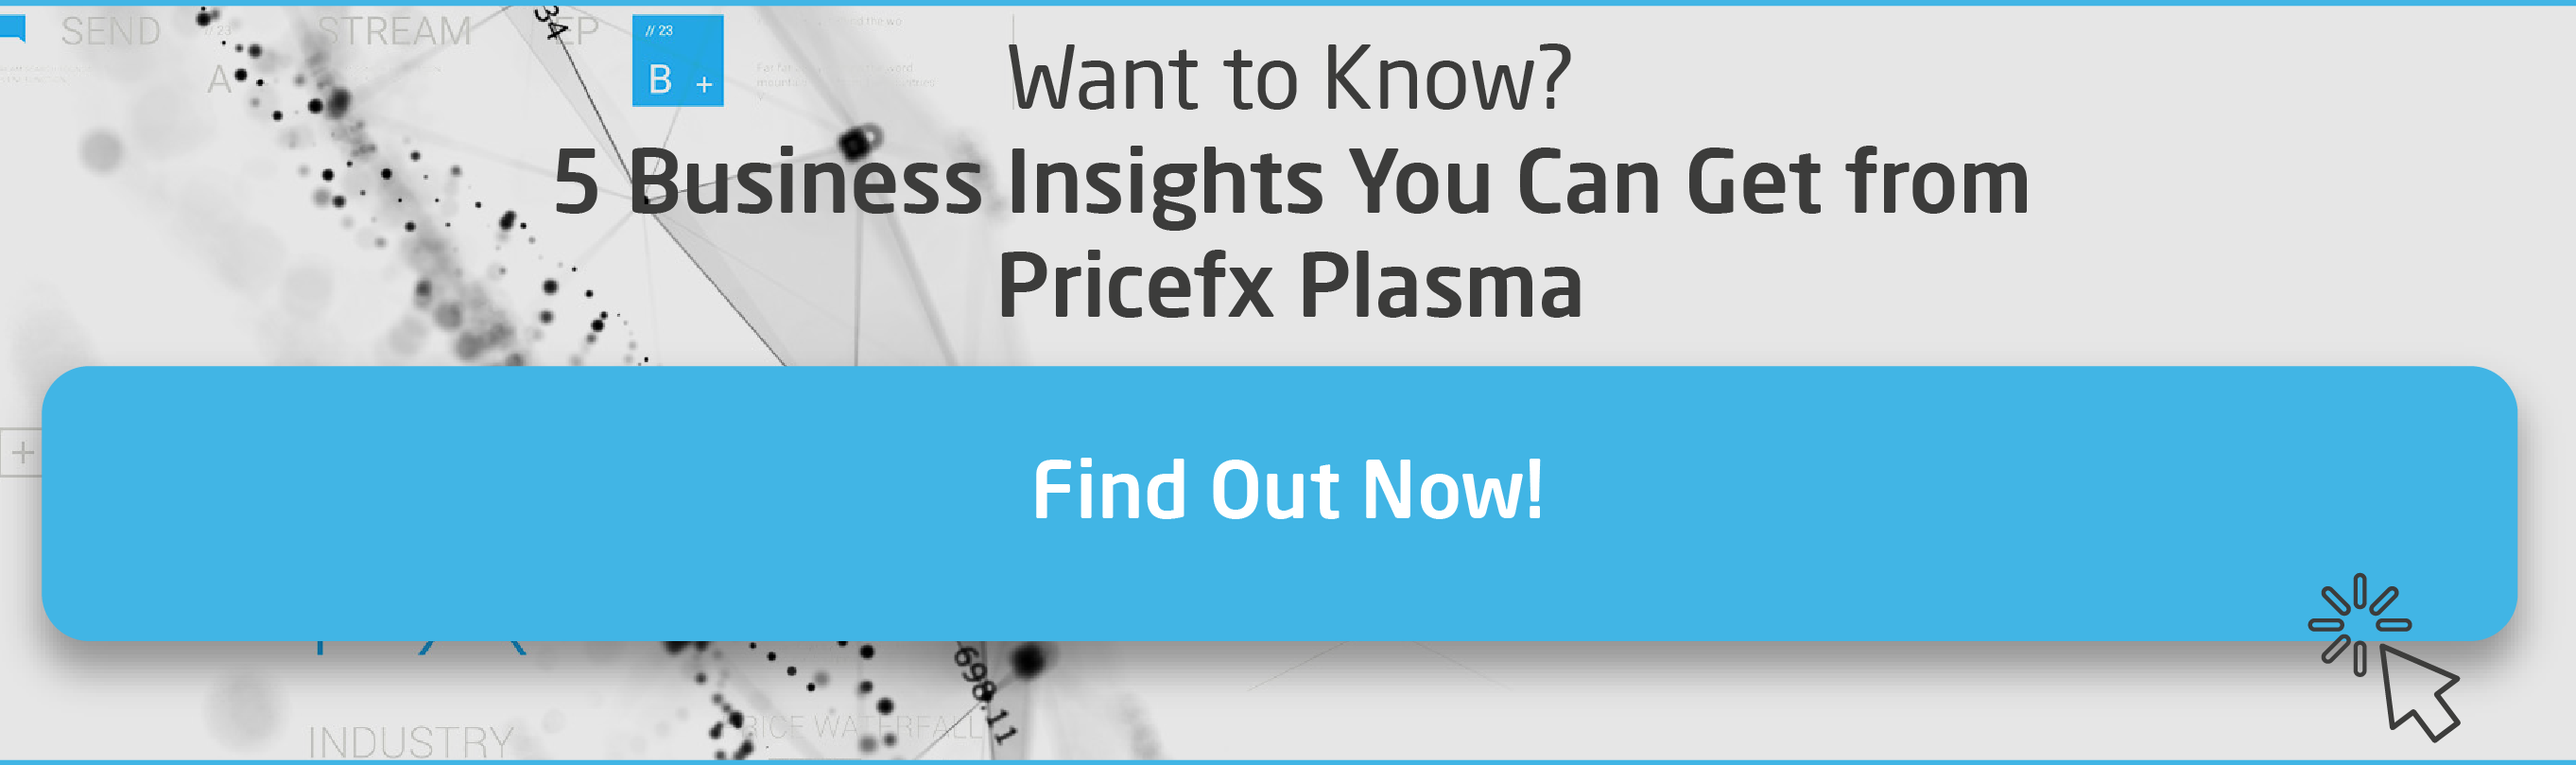 CTA_InArticle_5-Business-Insights-You-Can-Get-from-Pricefx-Plasma